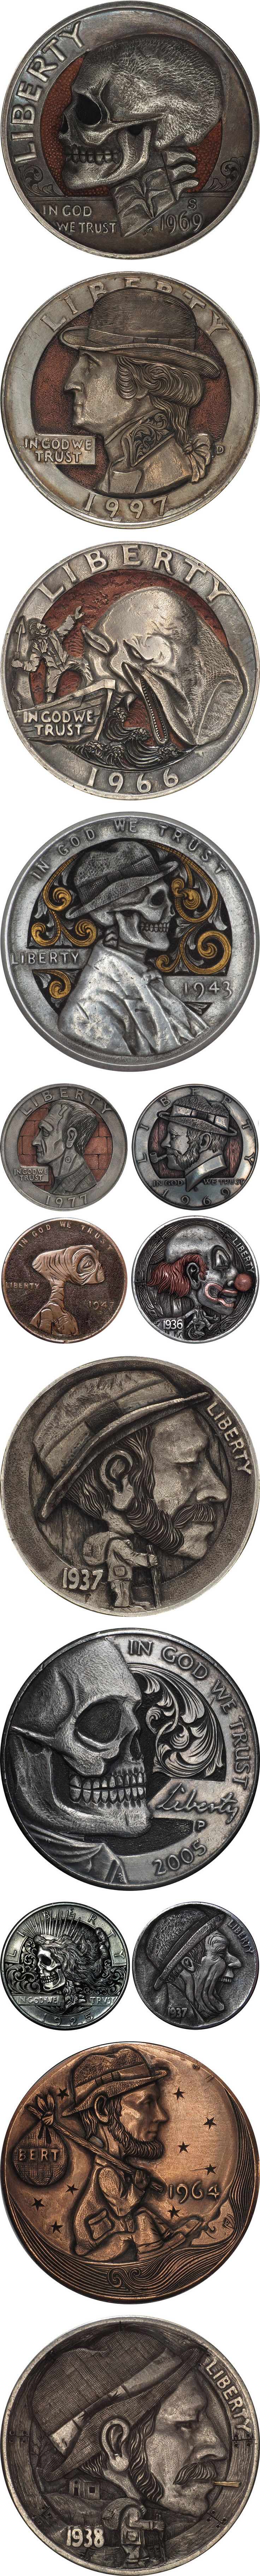 198 best Coin & Currency Art images on Pinterest | Coins, Garage ...